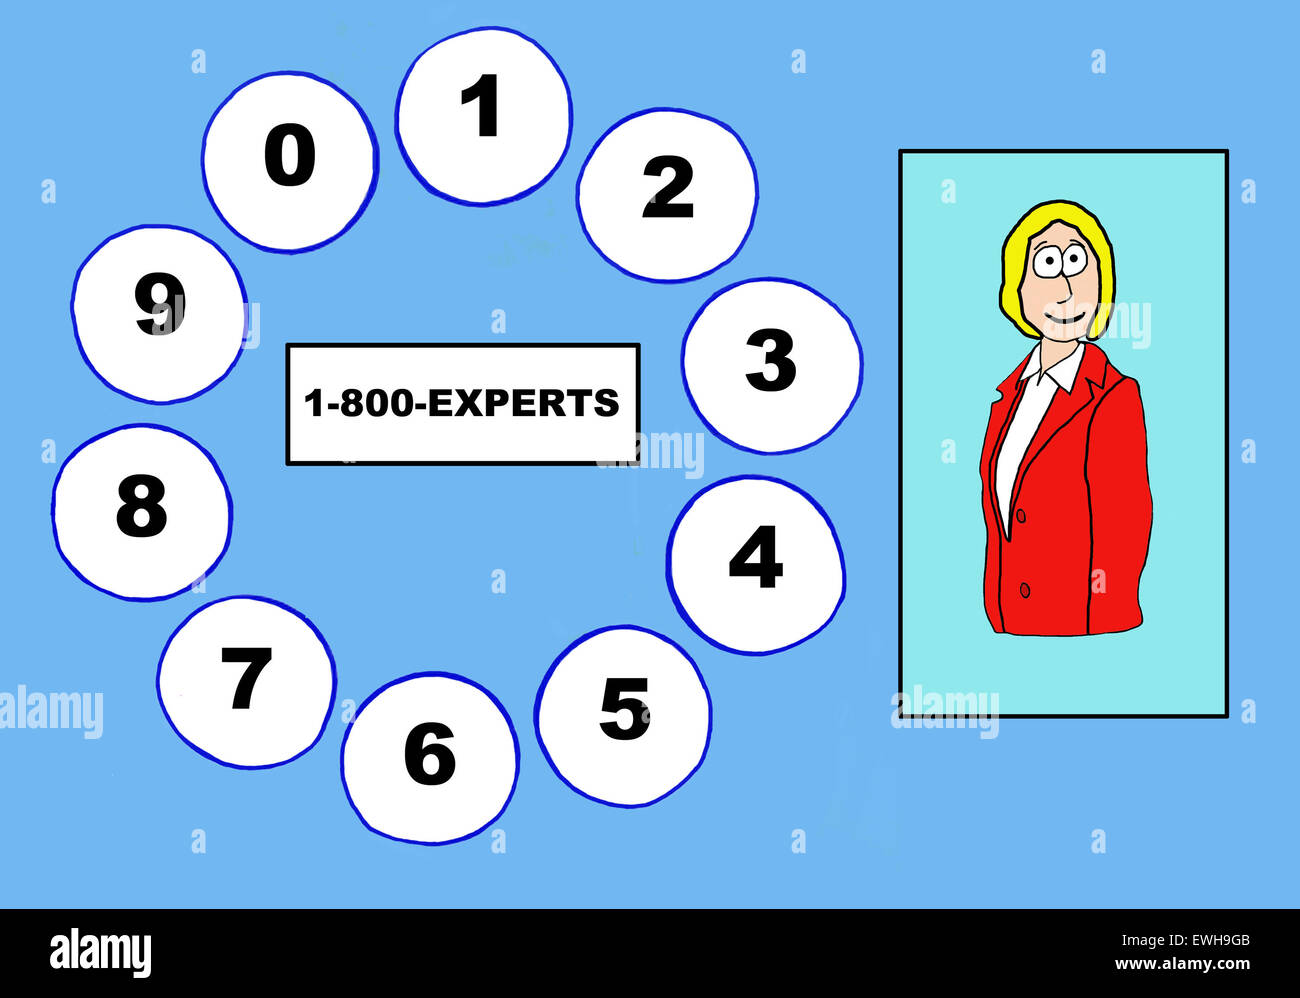 Business cartoon of businesswoman, telephone touch pad and 1-800-EXPERTS. Stock Photo